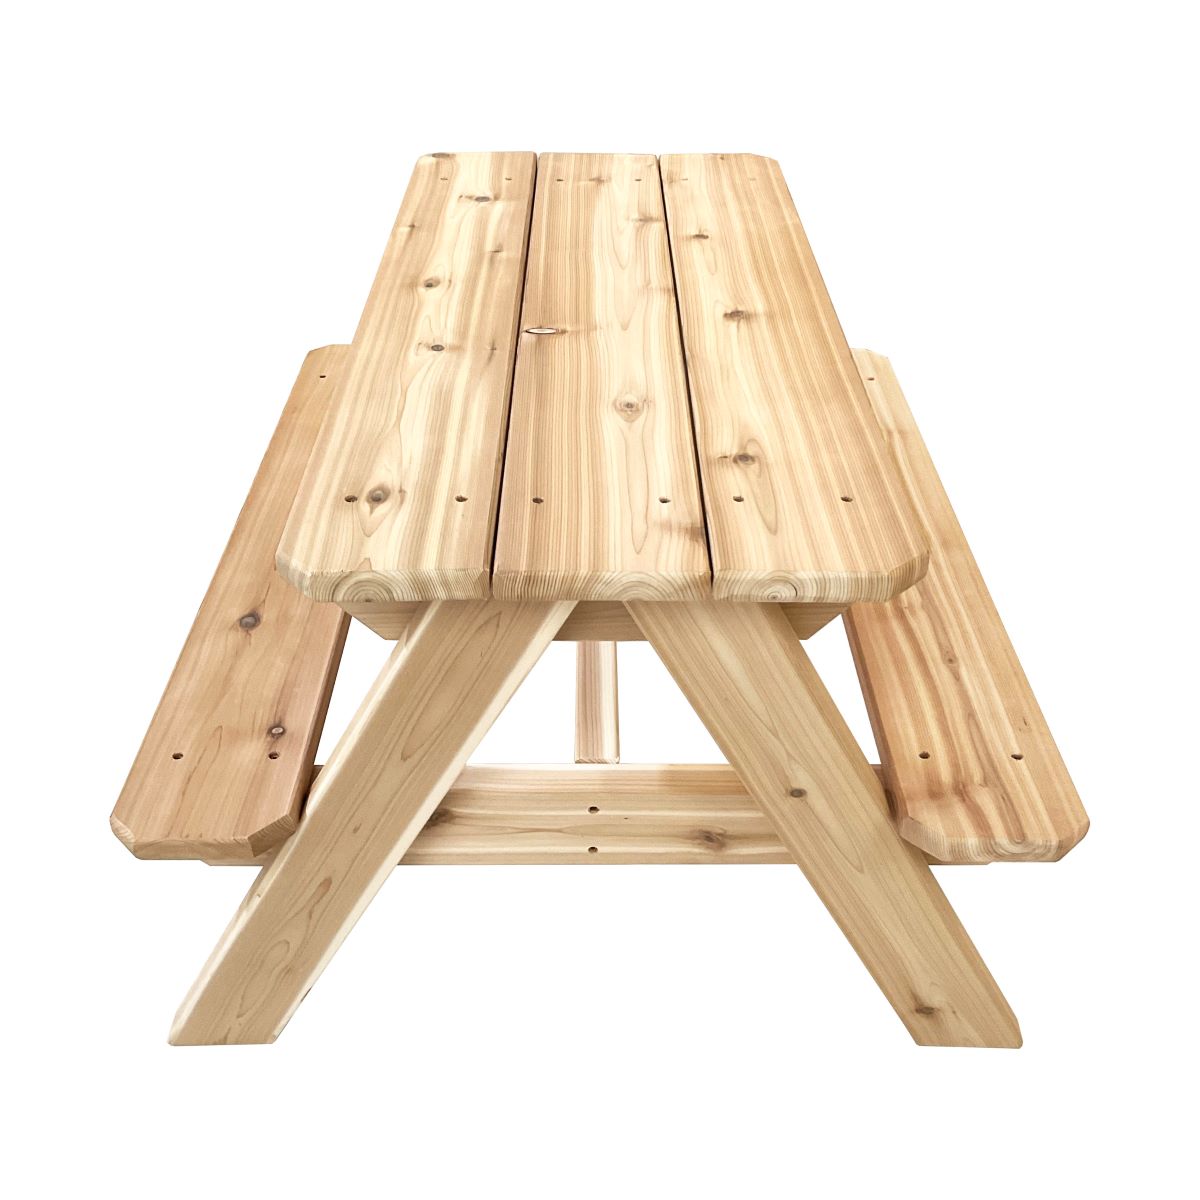 Cedar Rectangular Picnic Table - Just Playing (Made in Canada)